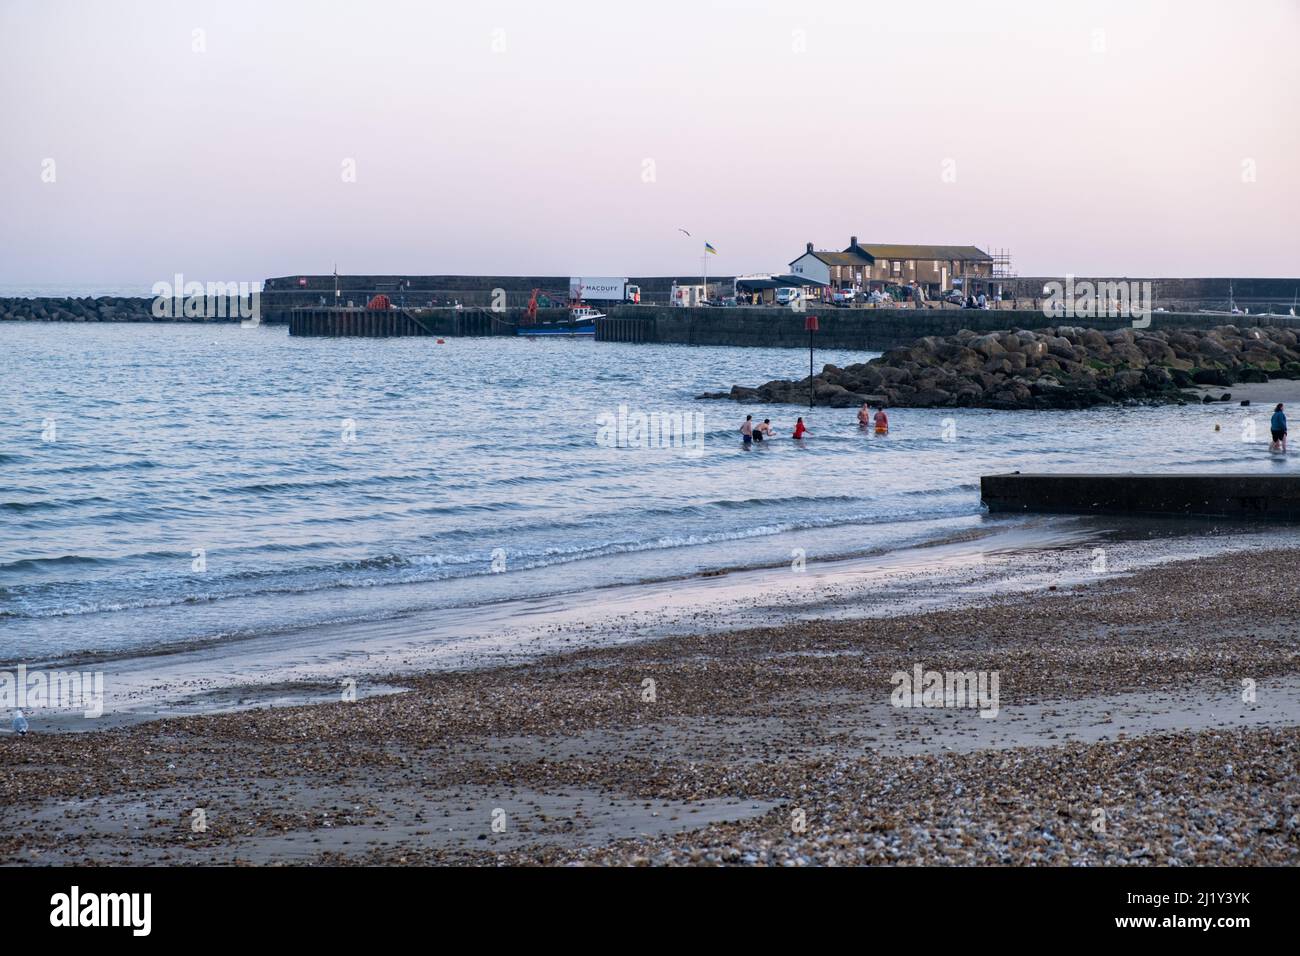 Teenagers playing in the sae at dusk in Lyme Regis, UK (Mar22) Stock Photo